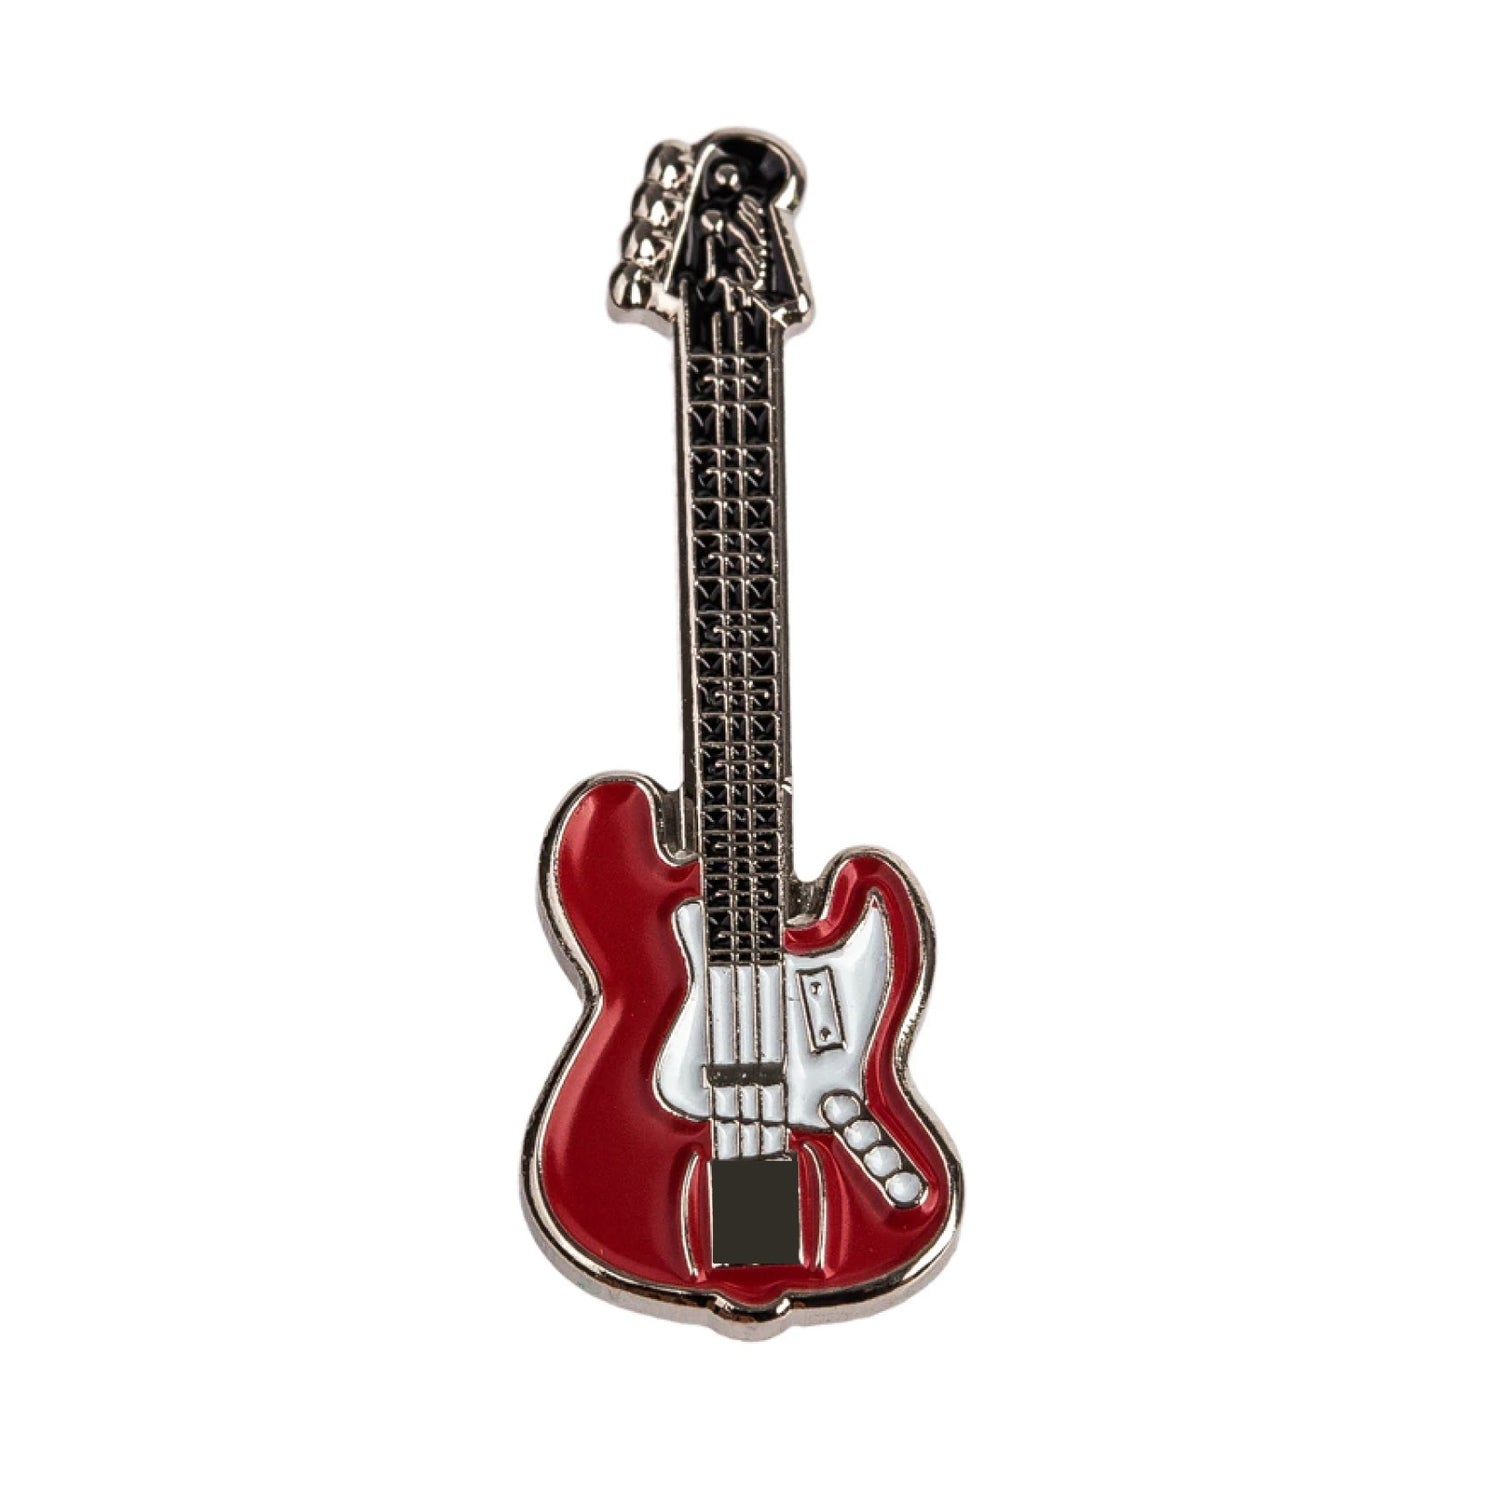 Main View: A Red and Chrome Guitar Lapel Pin